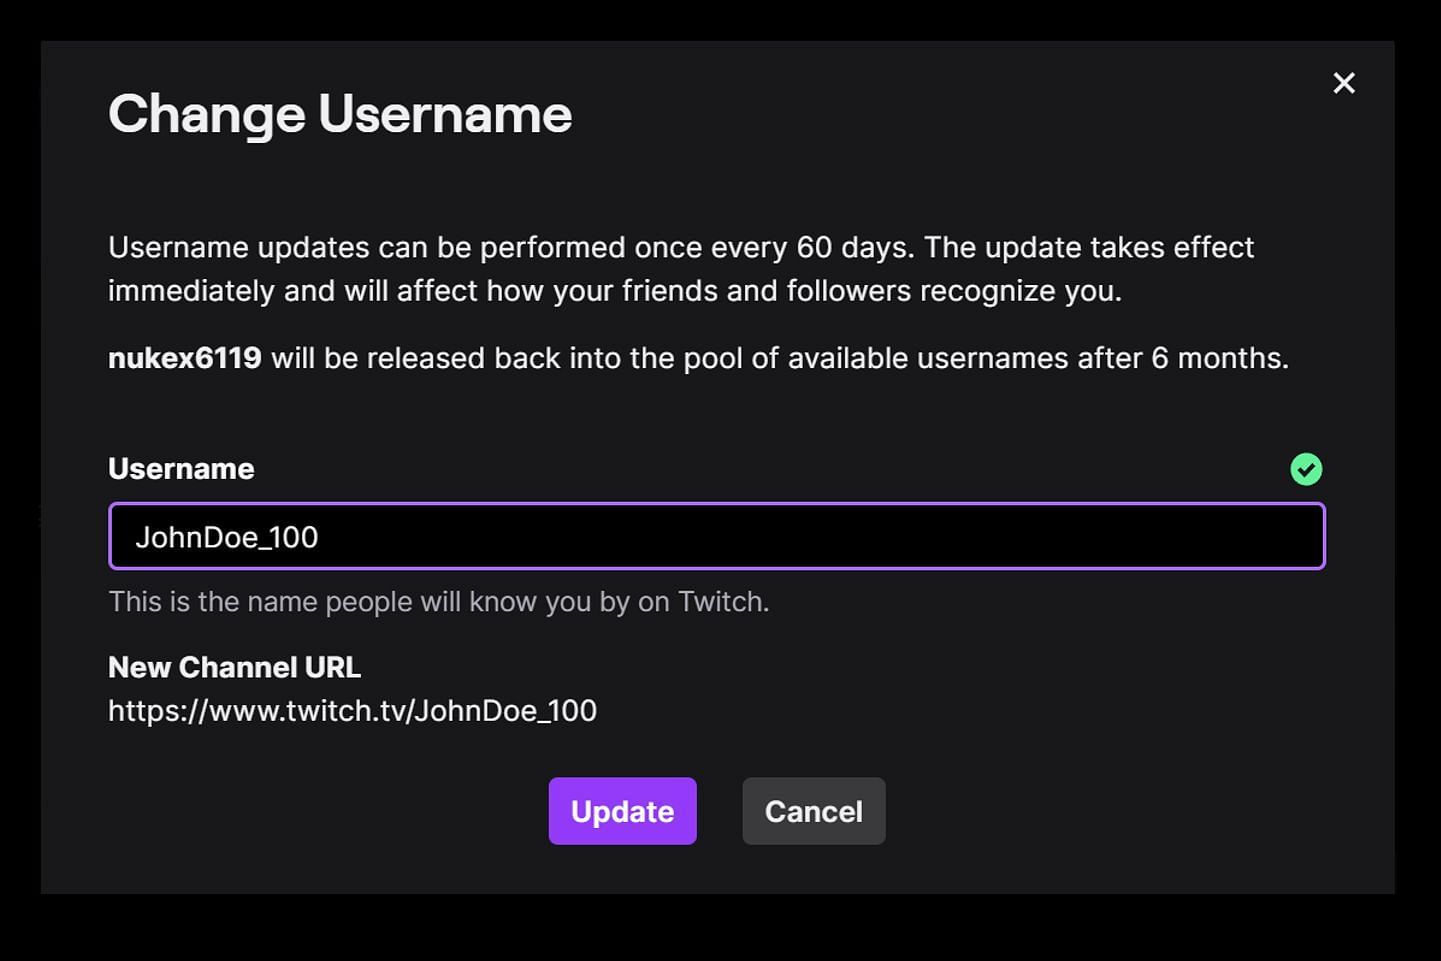 Enter a new username of your liking (Image via Twitch)